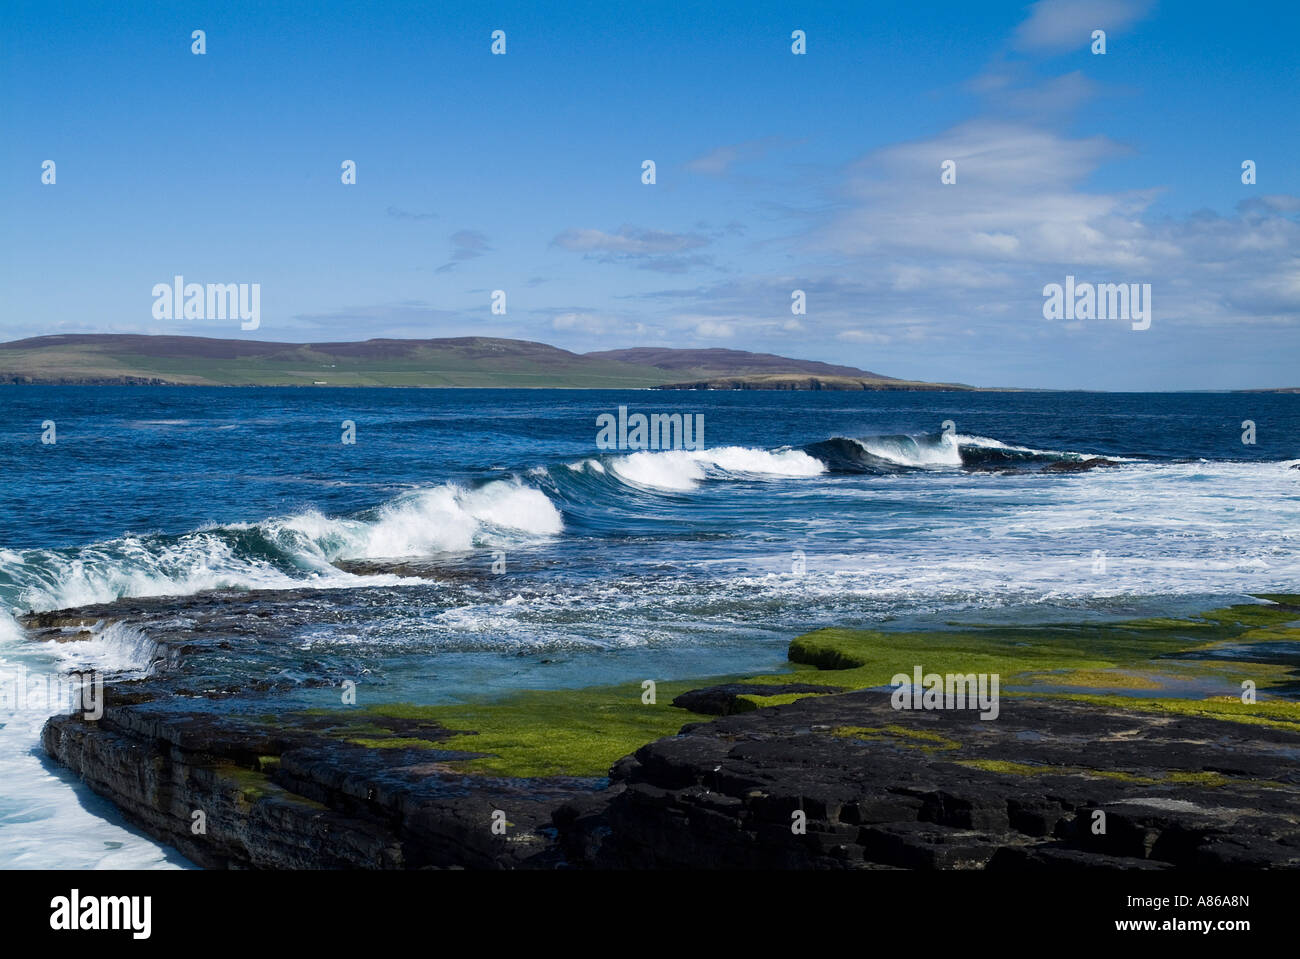 dh Eynhallow Sound EVIE ORKNEY Rolling waves ashore seacliff shelf blue sea and Rousay island coast sounds Stock Photo